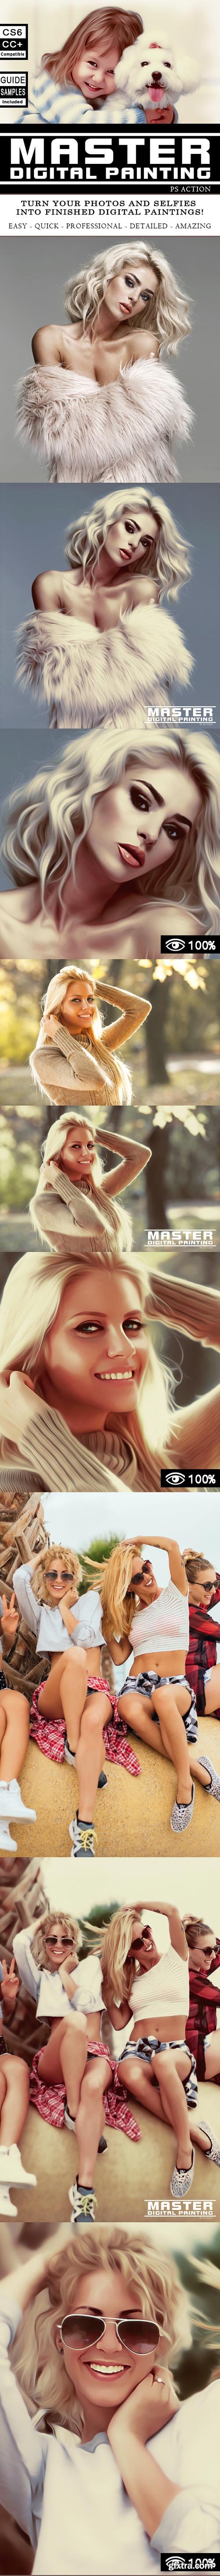 Graphicriver Master Digital Painting - PS Action 19462634